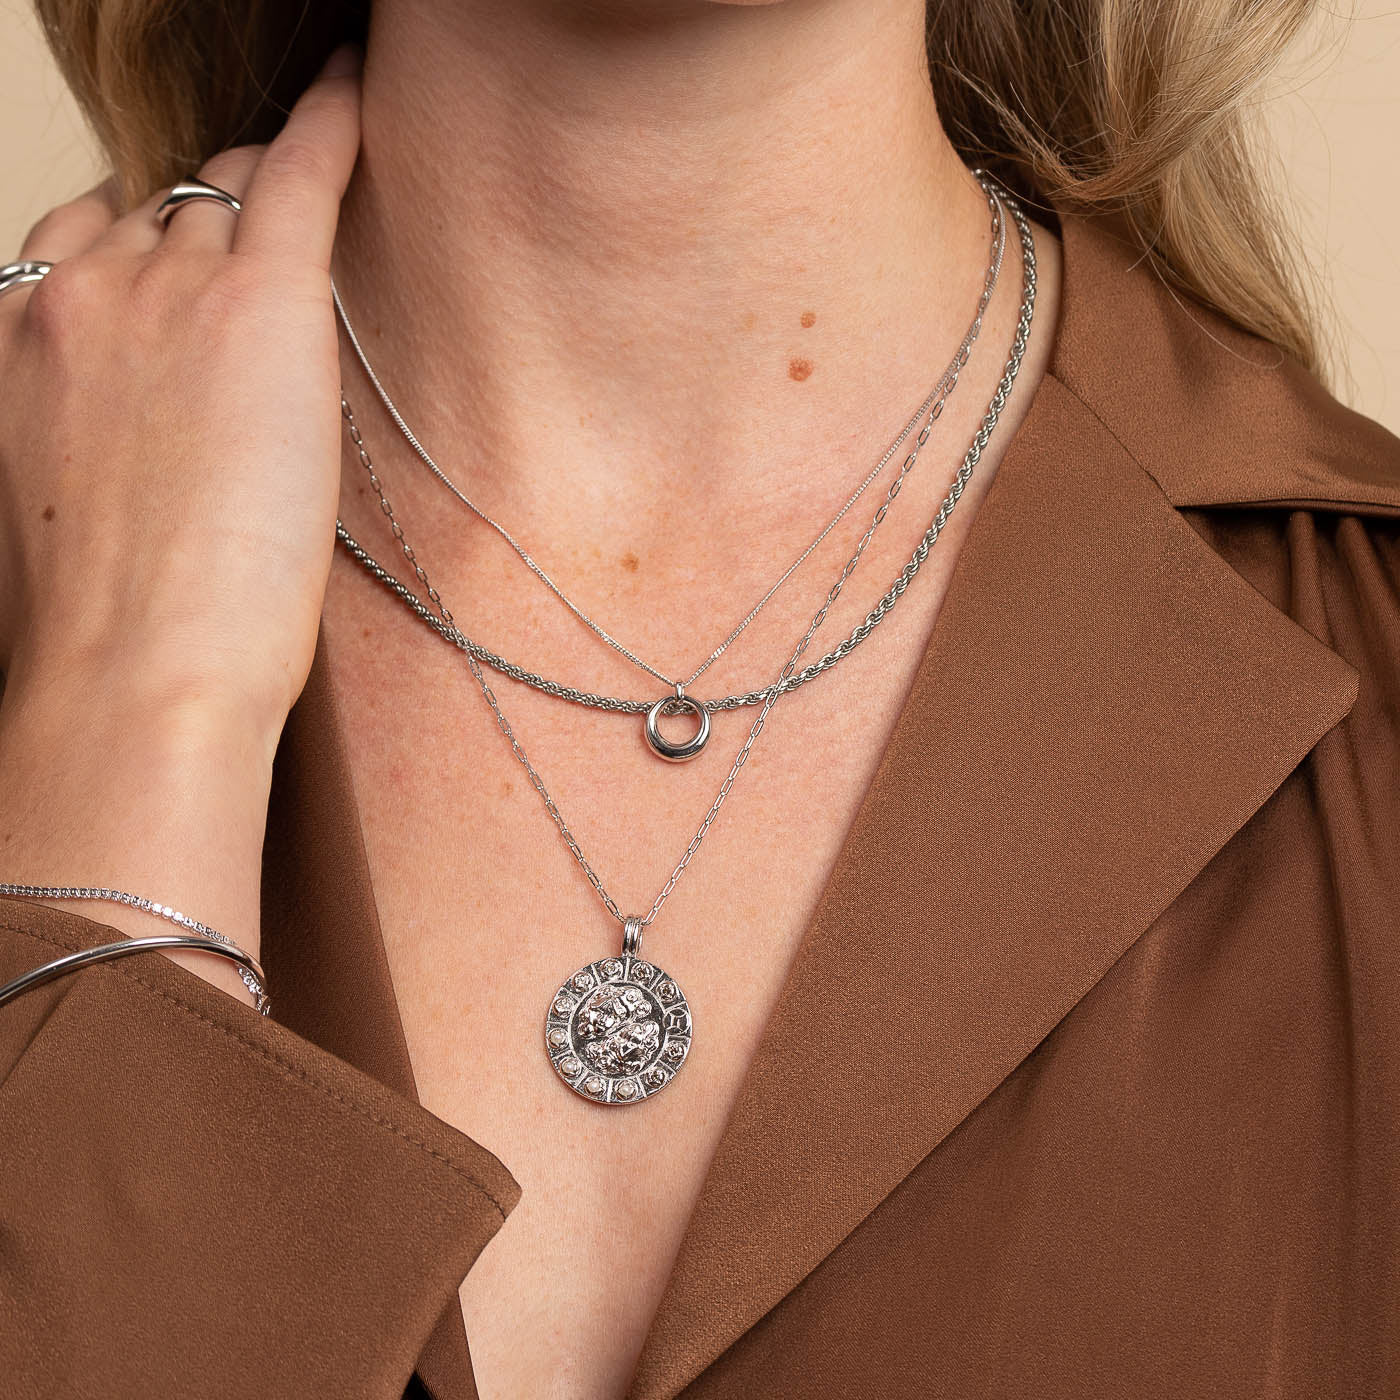 Gemini Bold Zodiac Pendant Necklace in Silver worn layered with halo pendant necklace and rope chain necklace